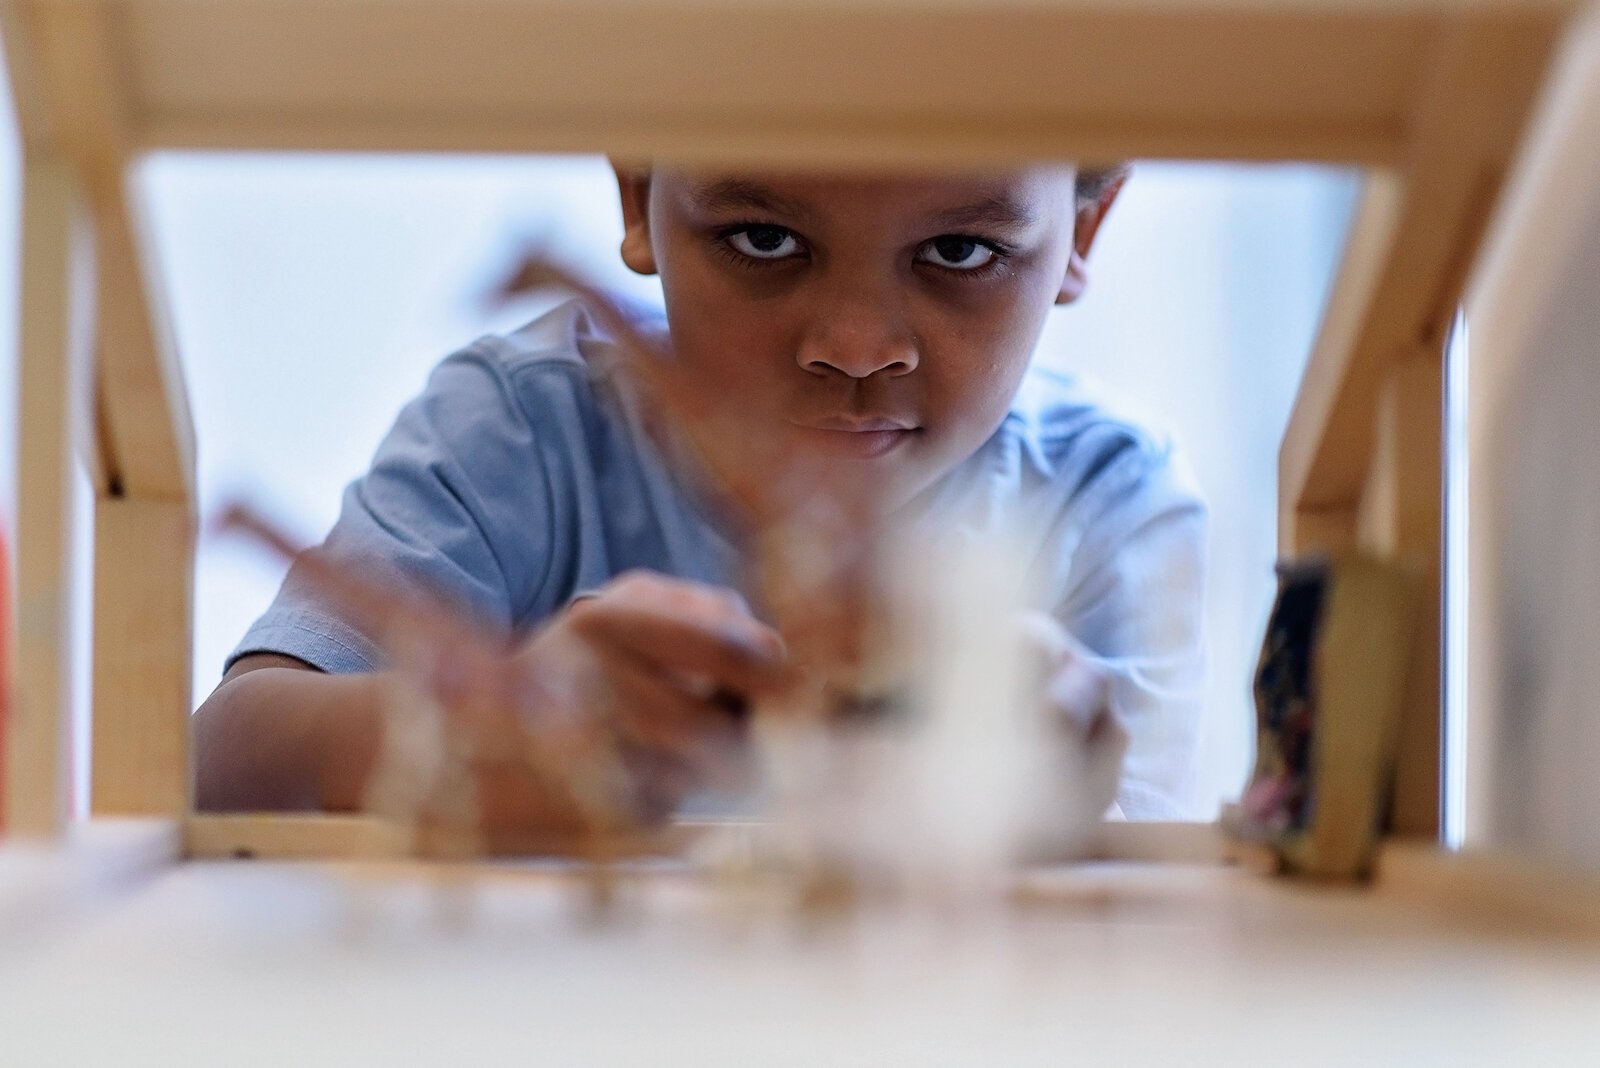 KahRelle Merchant looks through an opening of a toy house.